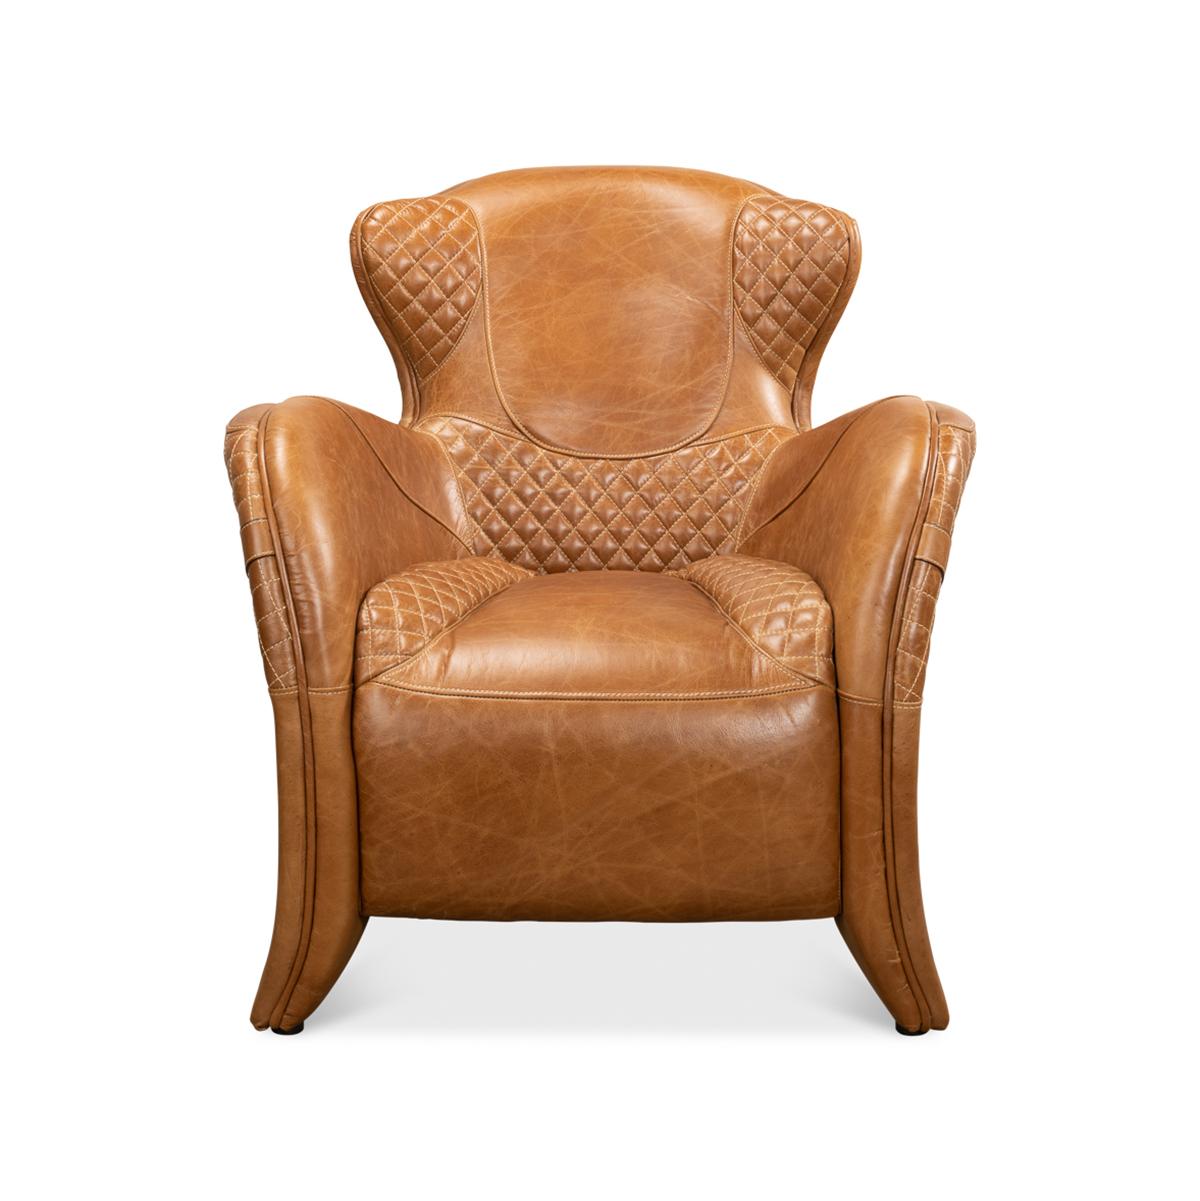 Modern quilted leather armchair with top grain Cuba brown leather, with a sloping rear and curved arms, with a partially quilted seat and backrest, with decorative gilt buckles.

Dimensions: 31